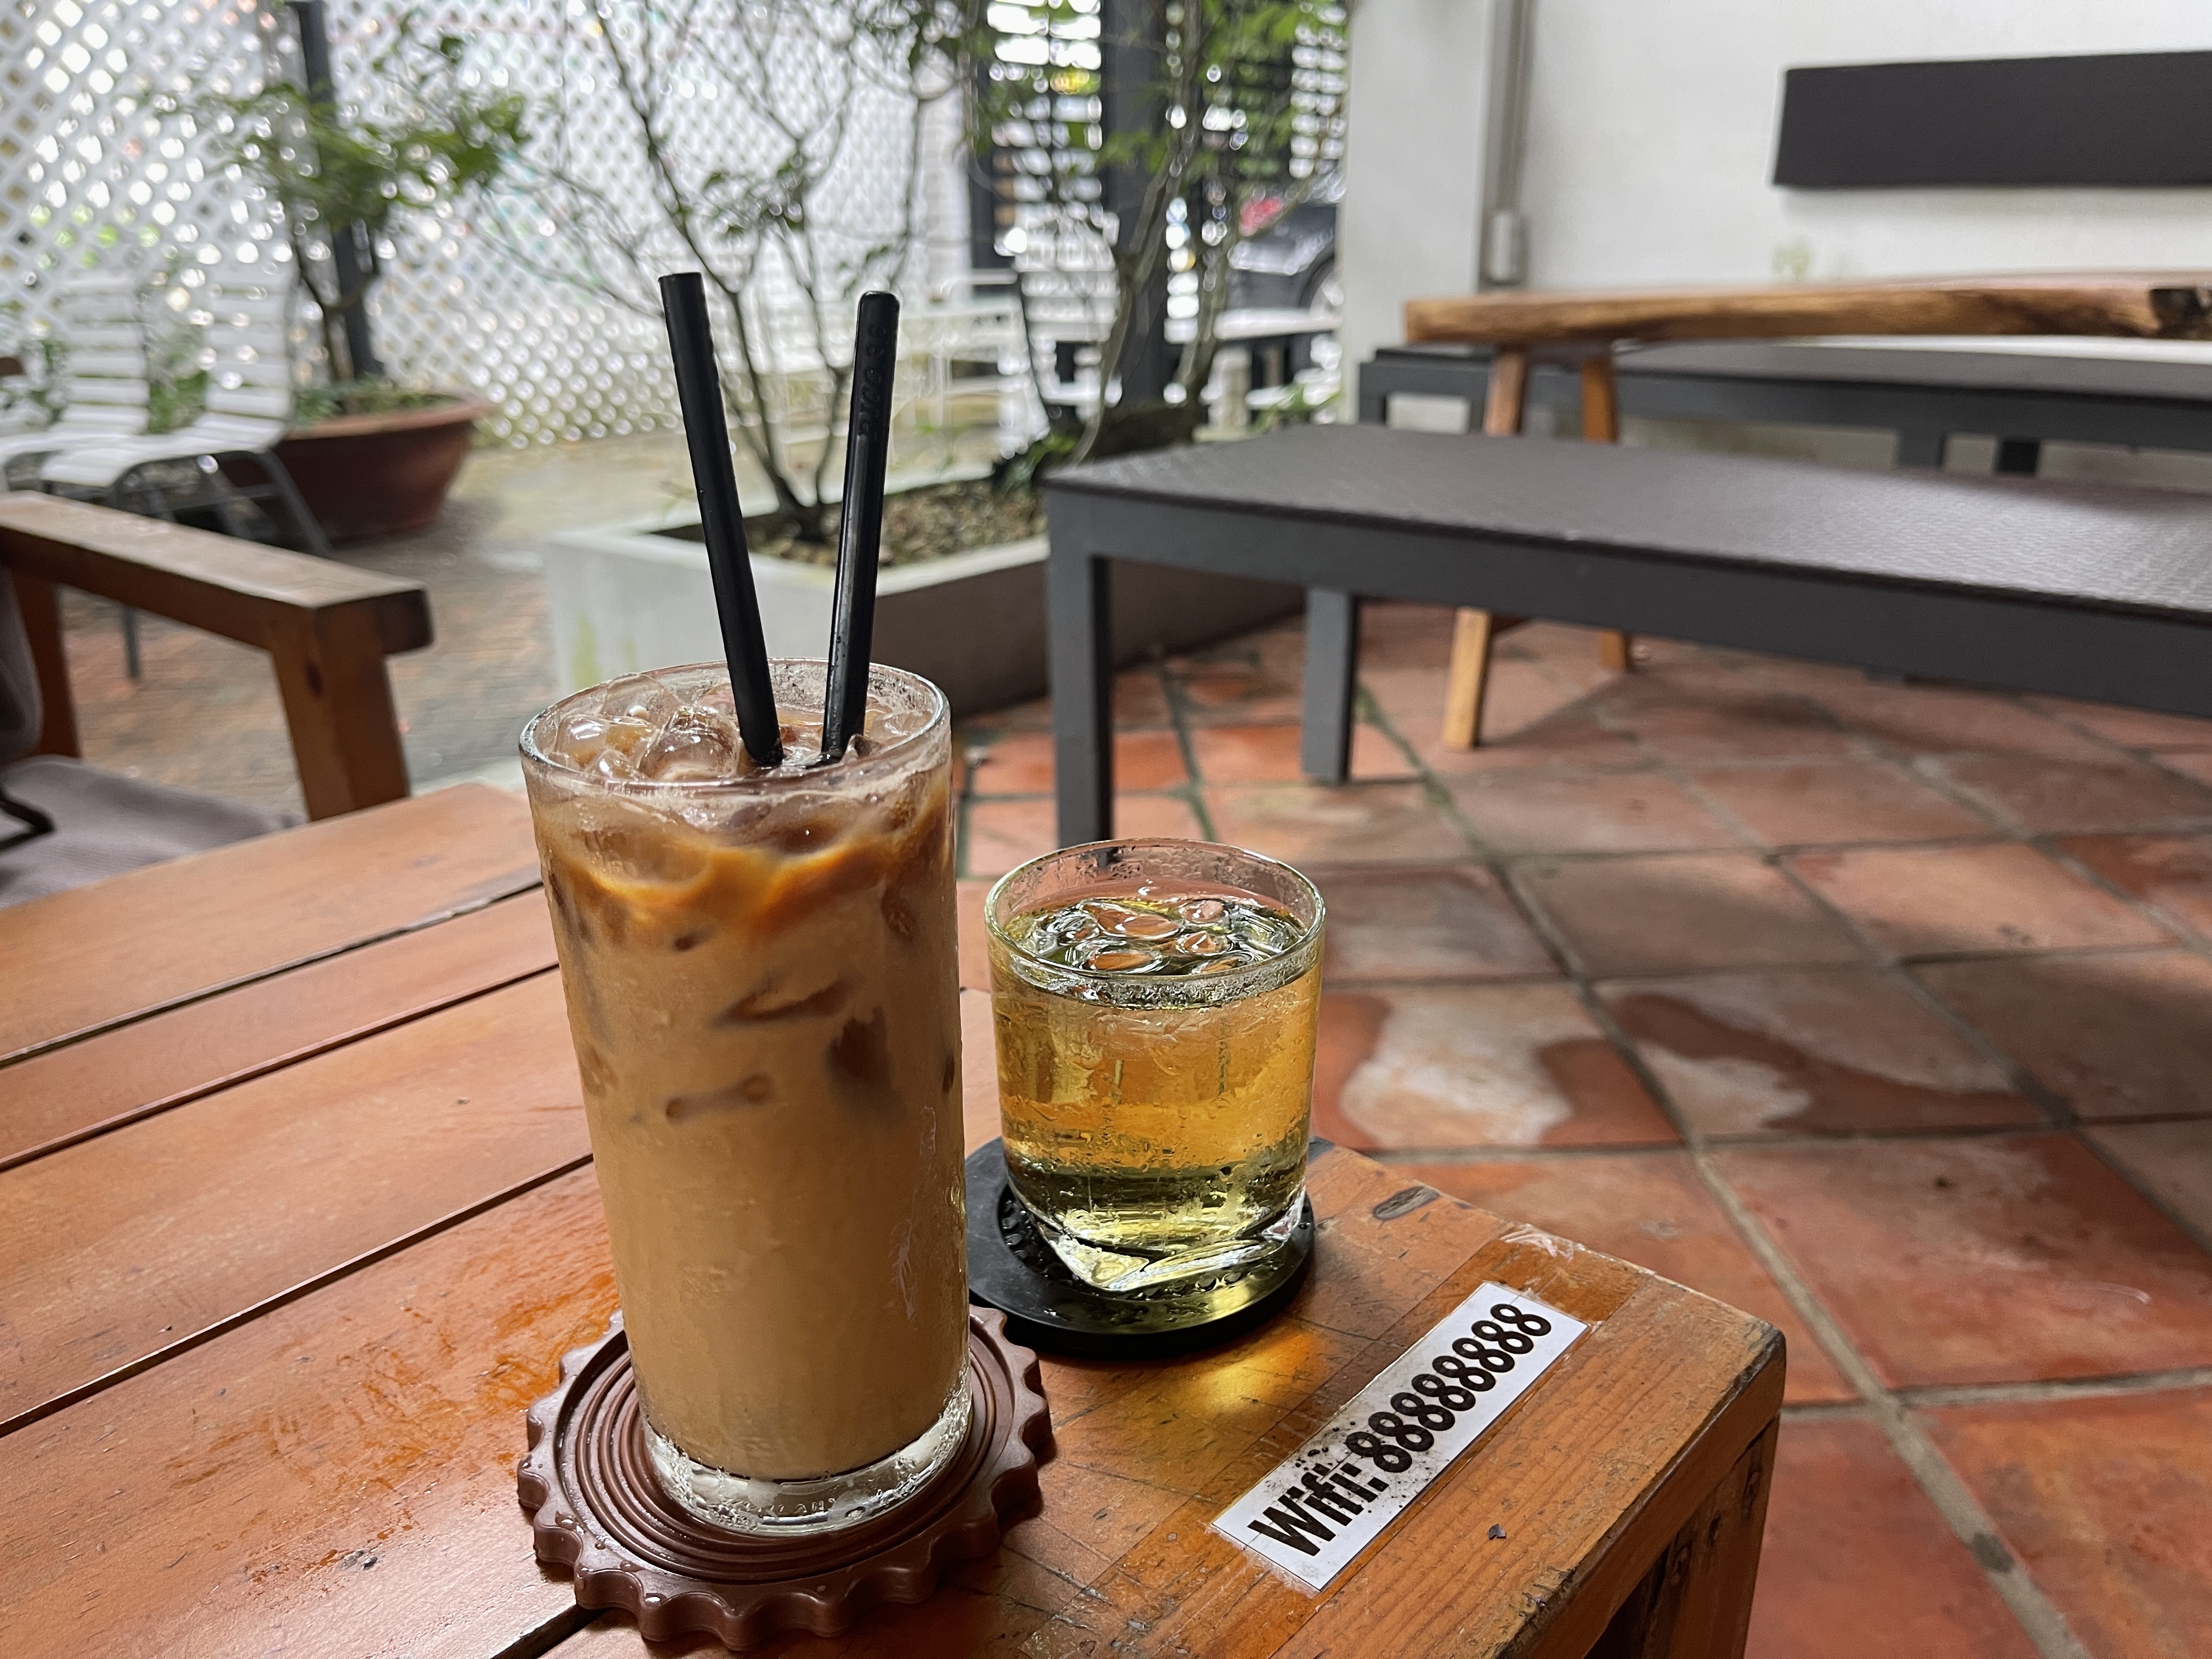 ‘Cà phê sữa đá’ is served with free iced tea and Wifi at a local coffee shop in Phu Quoc, Vietnam. Photo: Dong Nguyen / Tuoi Tre News